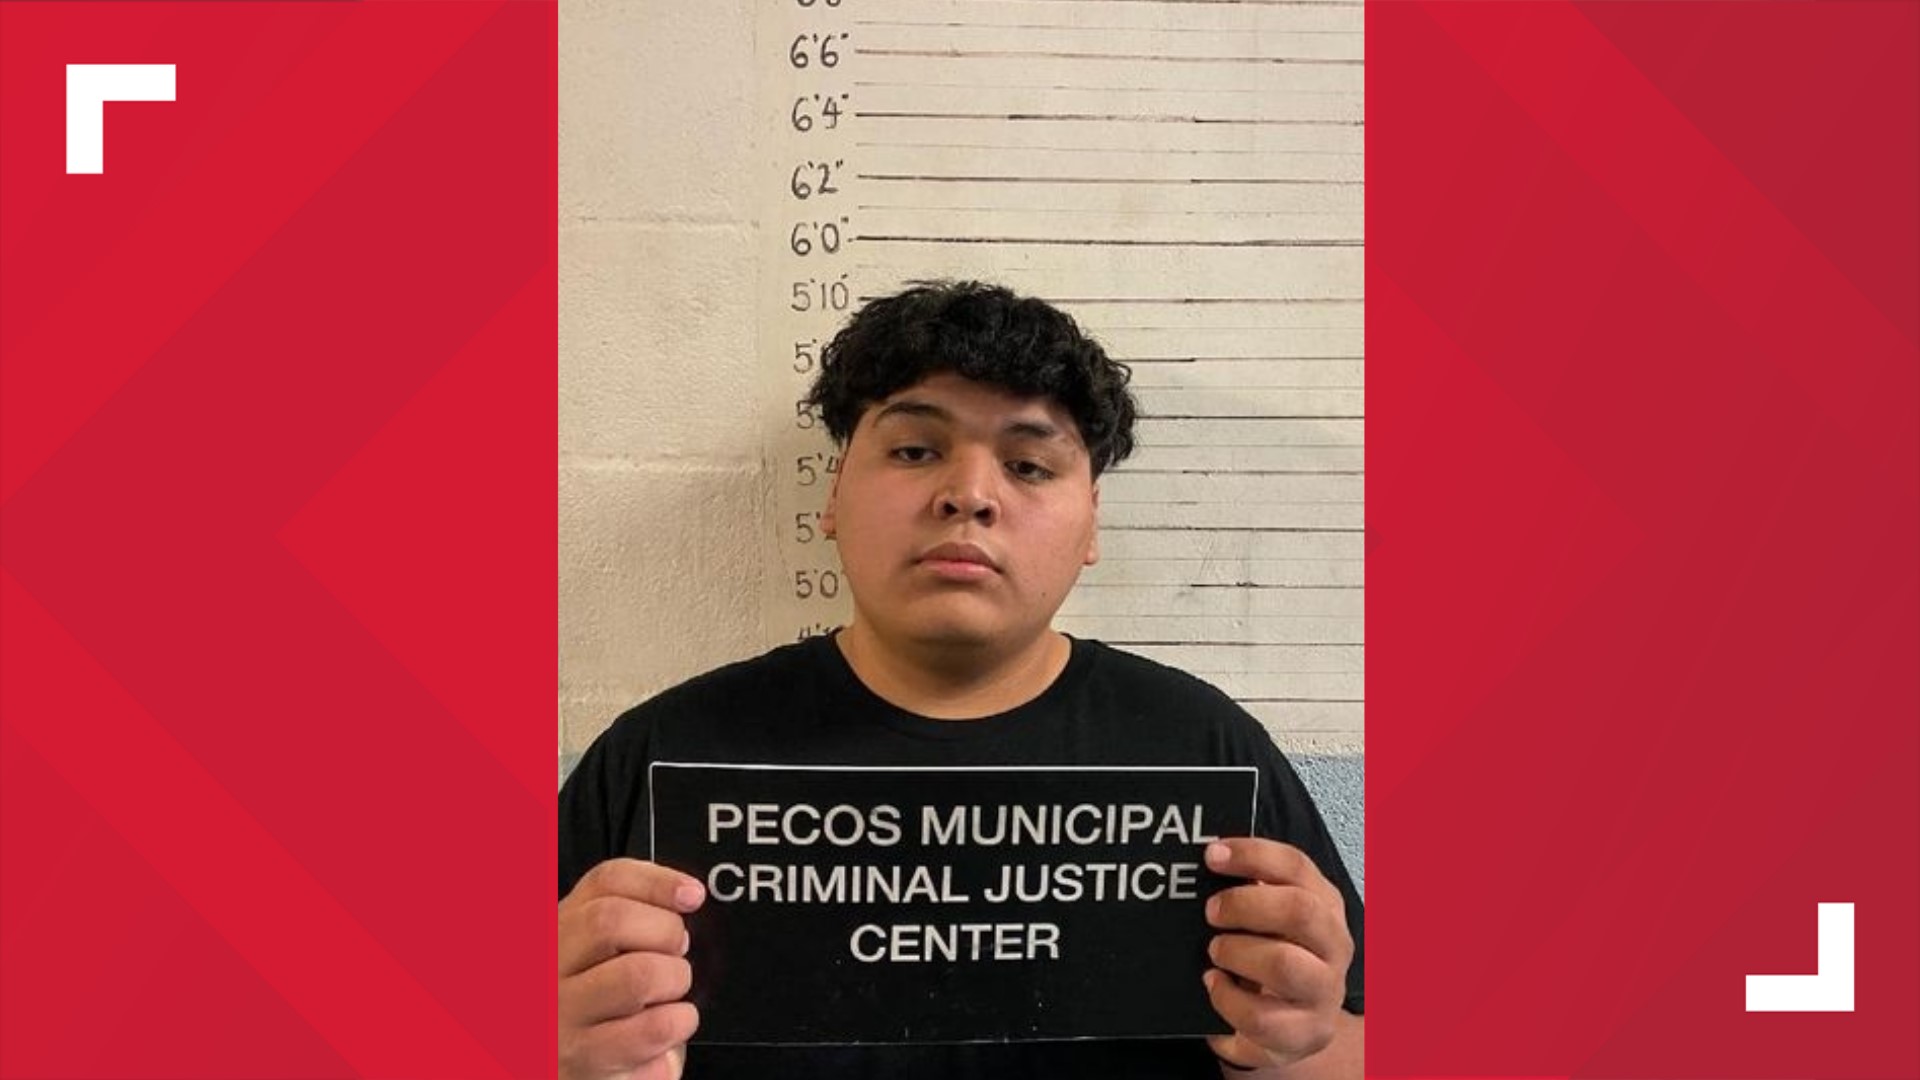 Daniel Calvillo was taken into custody Friday after threats that a shooting that would occur "at some high school" began circulating.